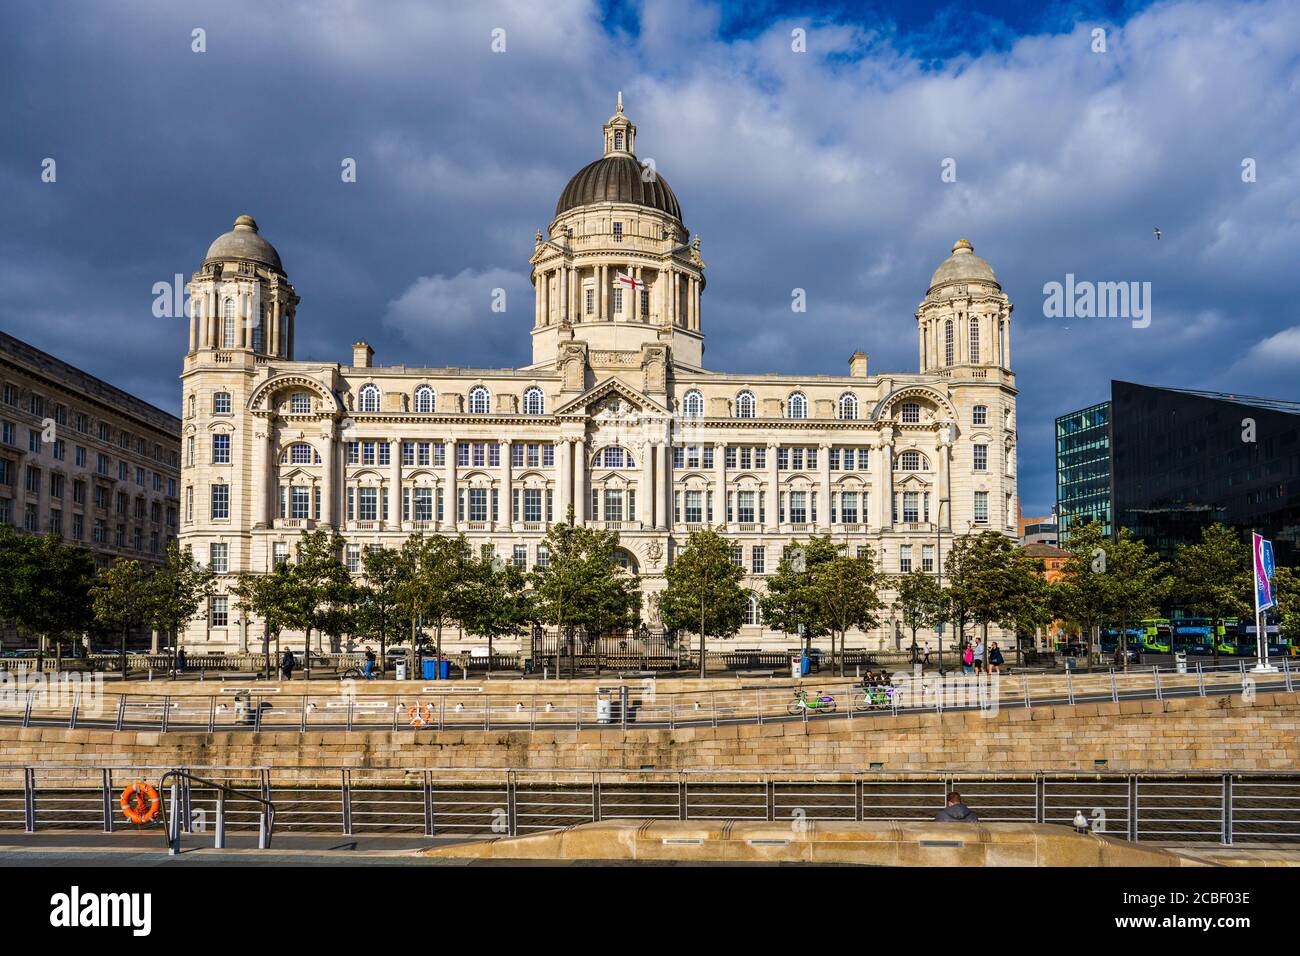 Port of Liverpool Building, Pier Head, Liverpool Waterfront. Grade II* listed, one of the Liverpool Three Graces buildings. Opened 1907. Stock Photo